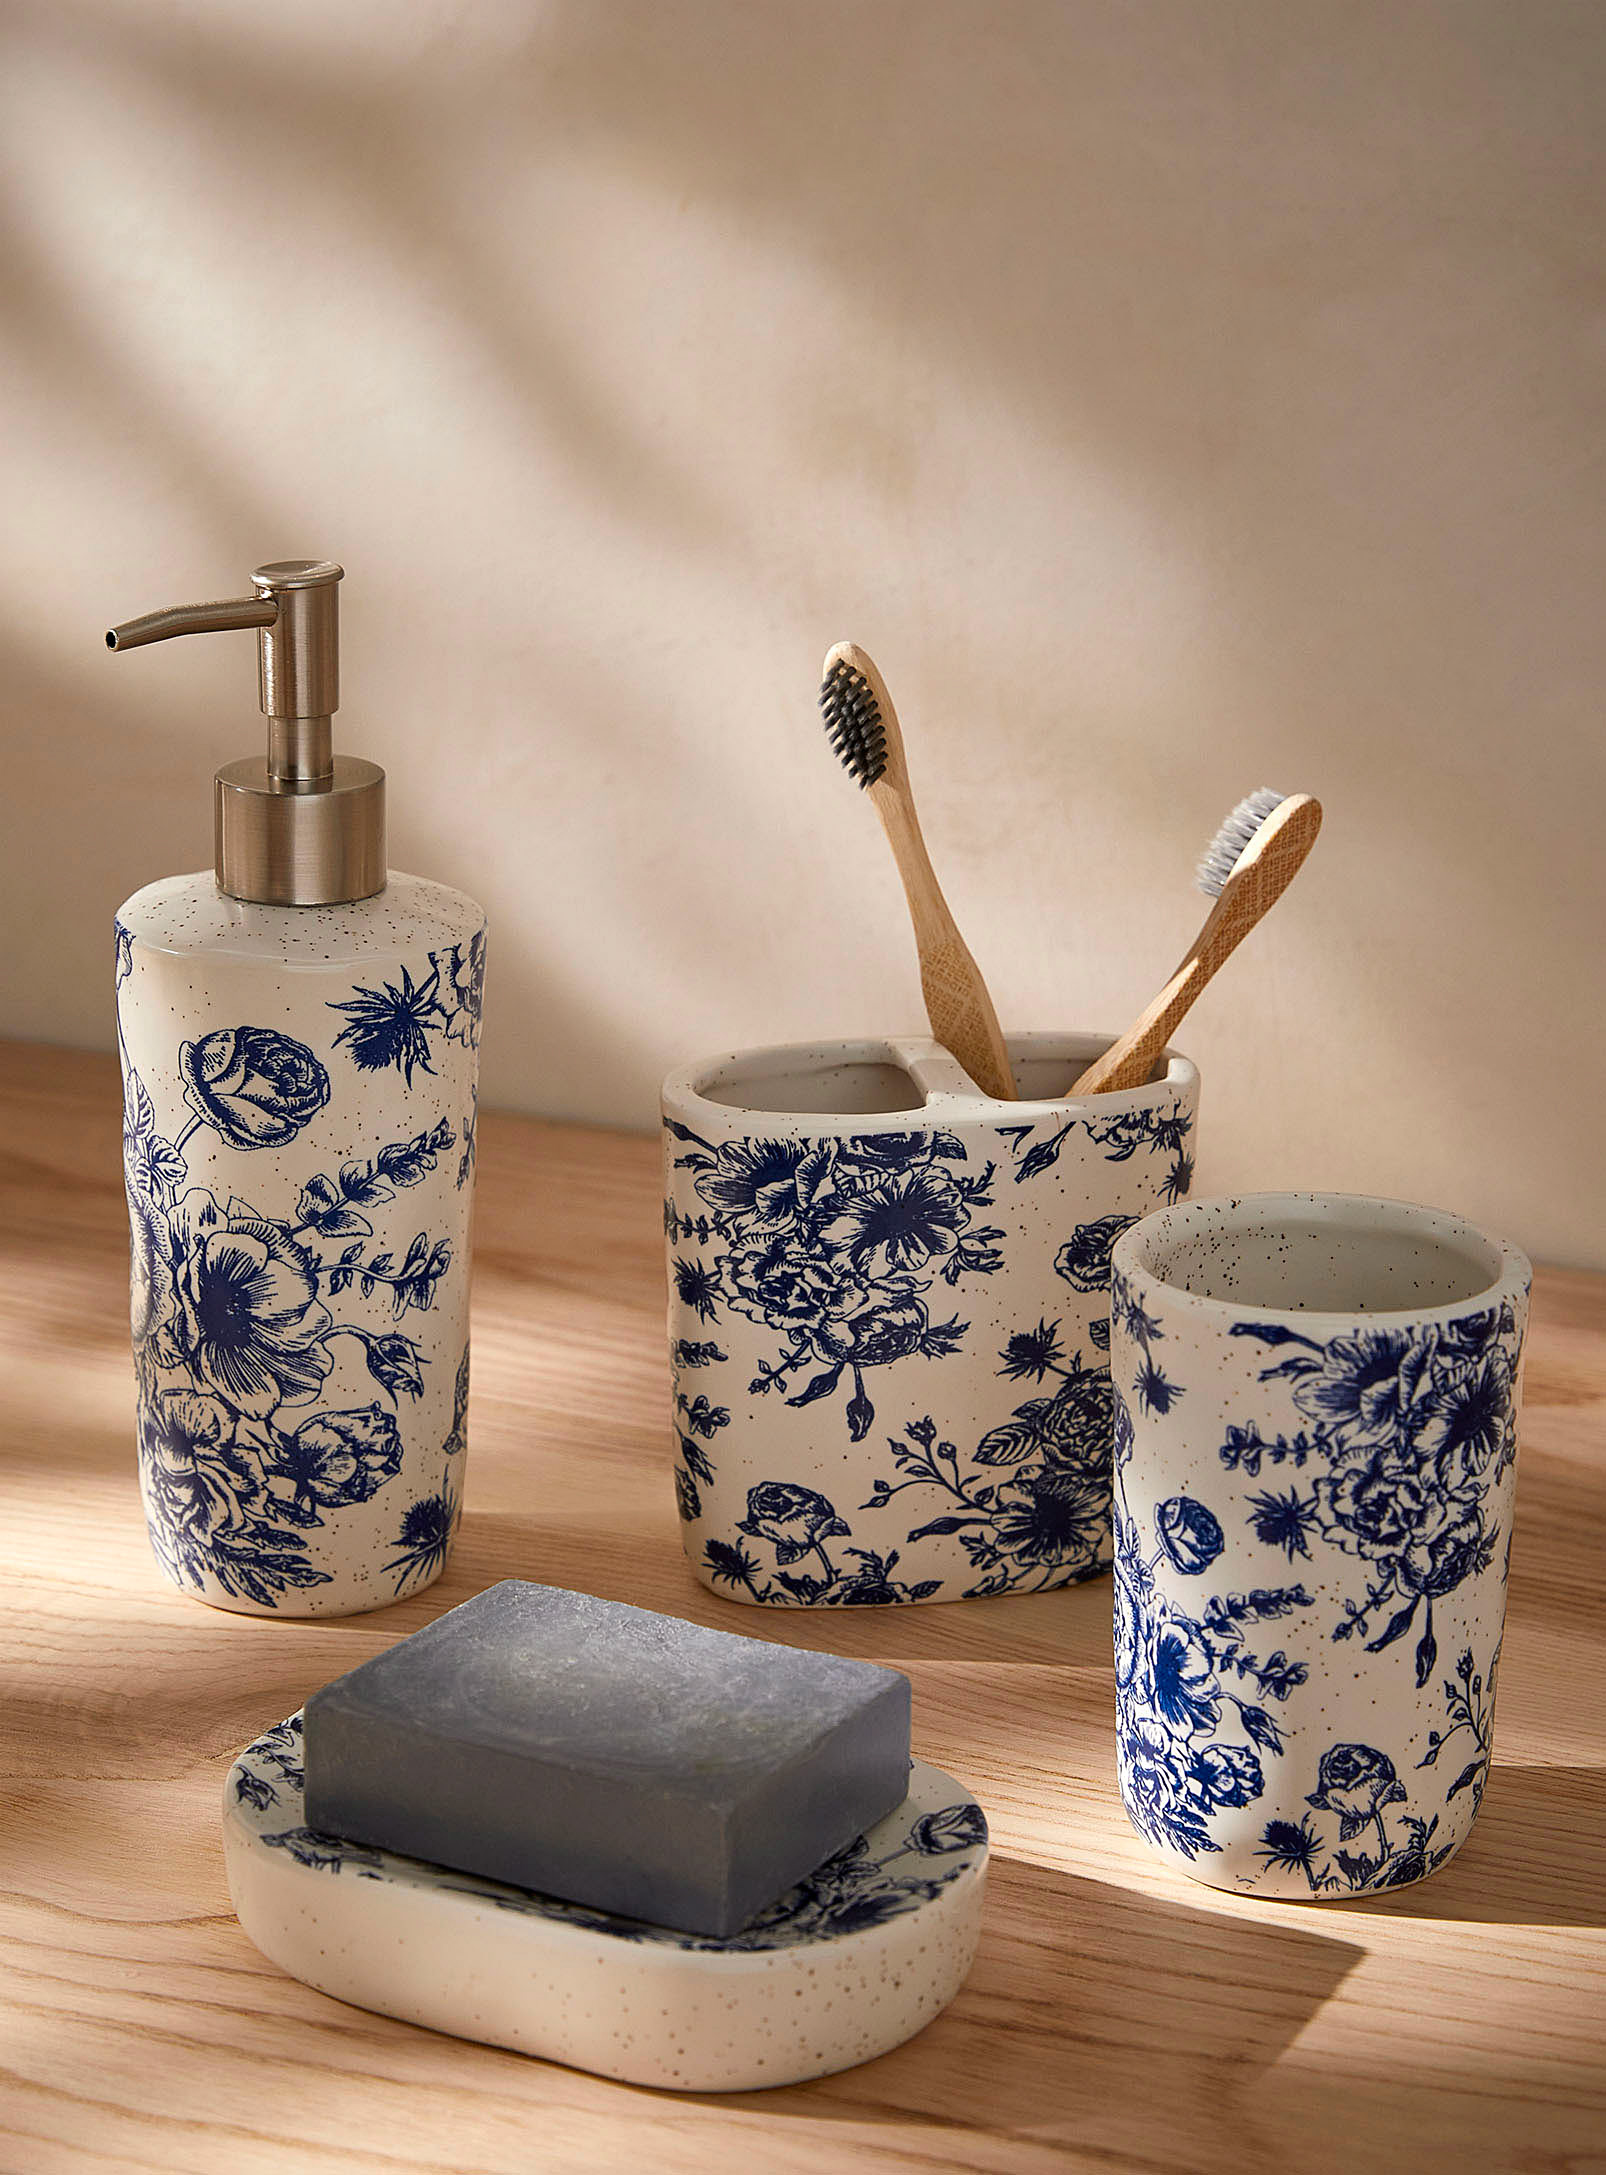 Simons Maison Floral Ceramic Accessories In Patterned Ecru